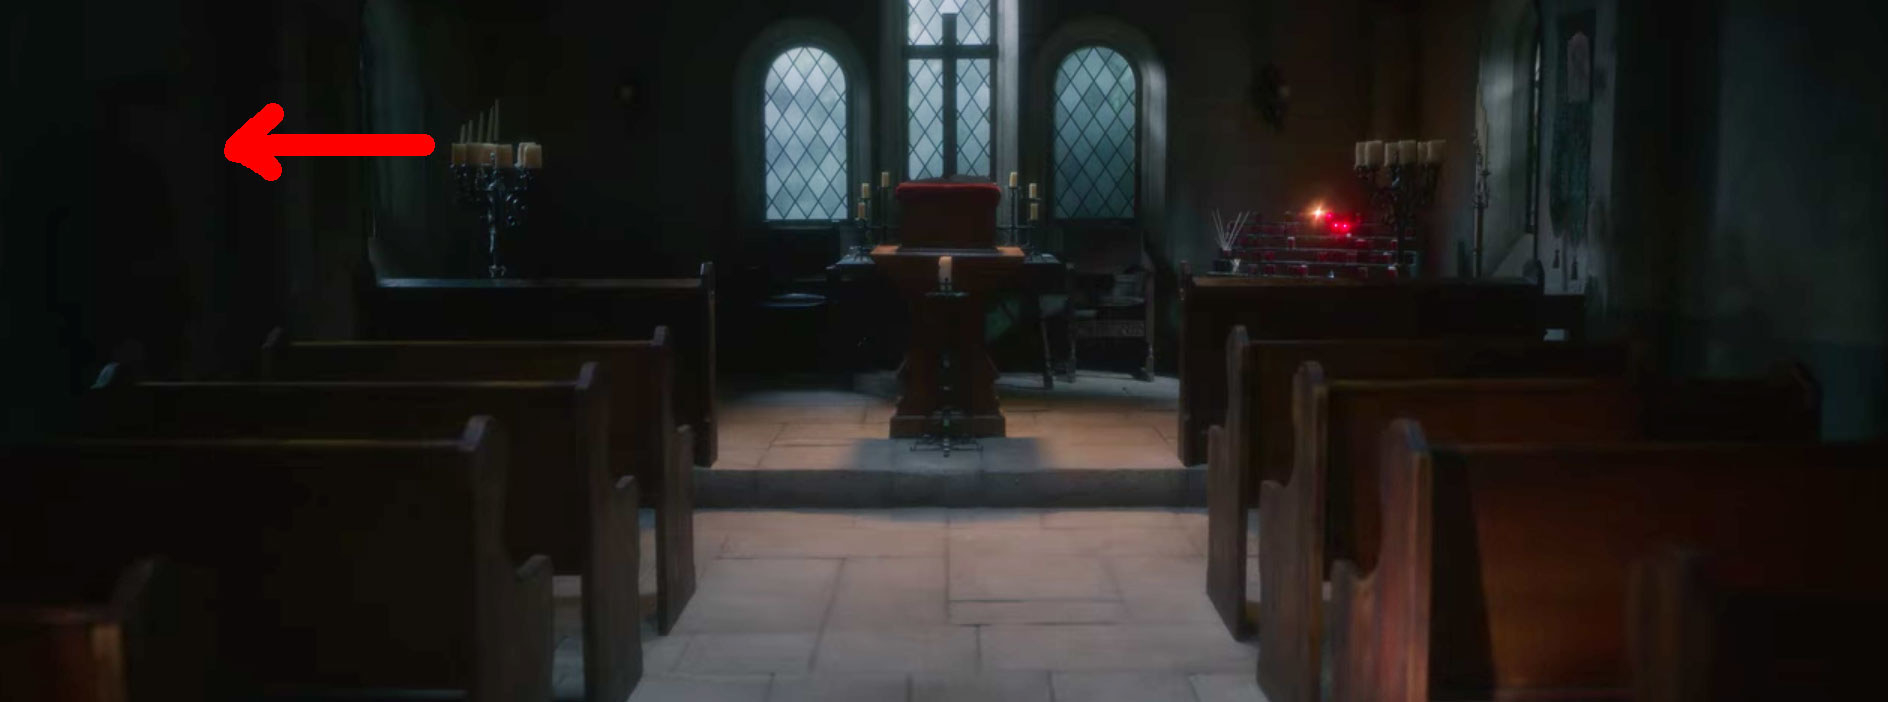 A red arrow points to the soldier ghost hidden in the shadows of the chapel